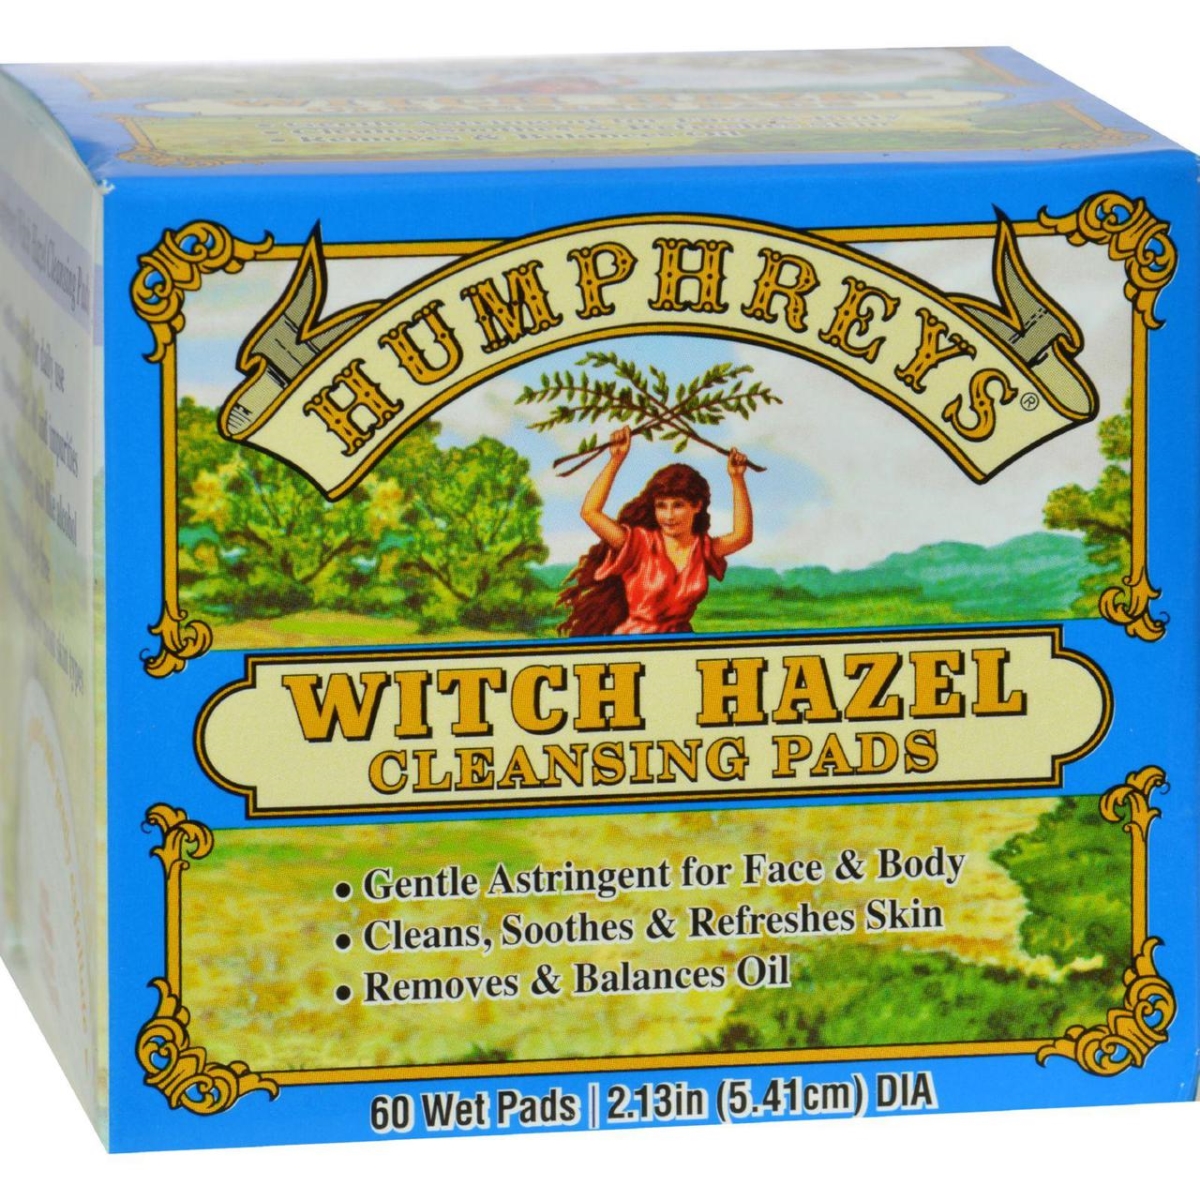 Hg0187021 Witch Hazel Cleansing Pads - 60 Pads